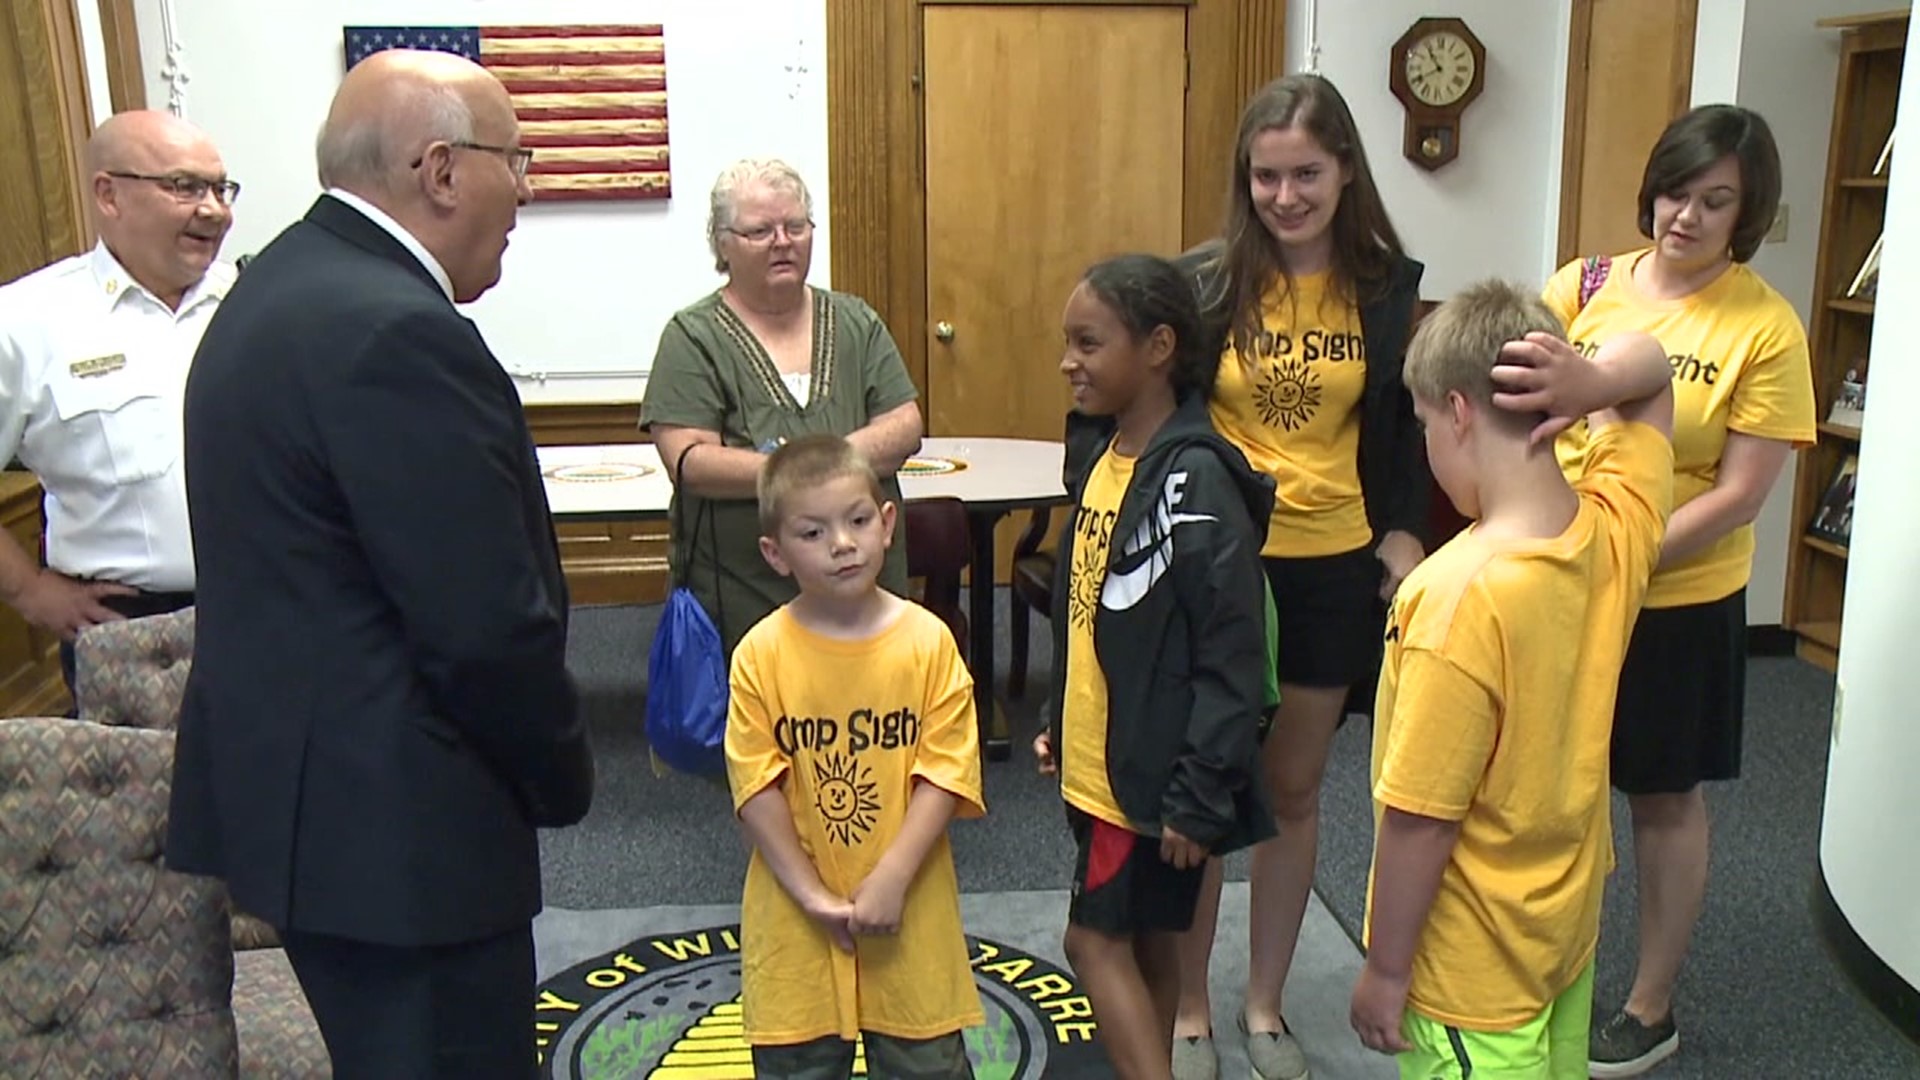 The trip for young campers who are blind or visually impaired included a stop at City Hall to meet the mayor.